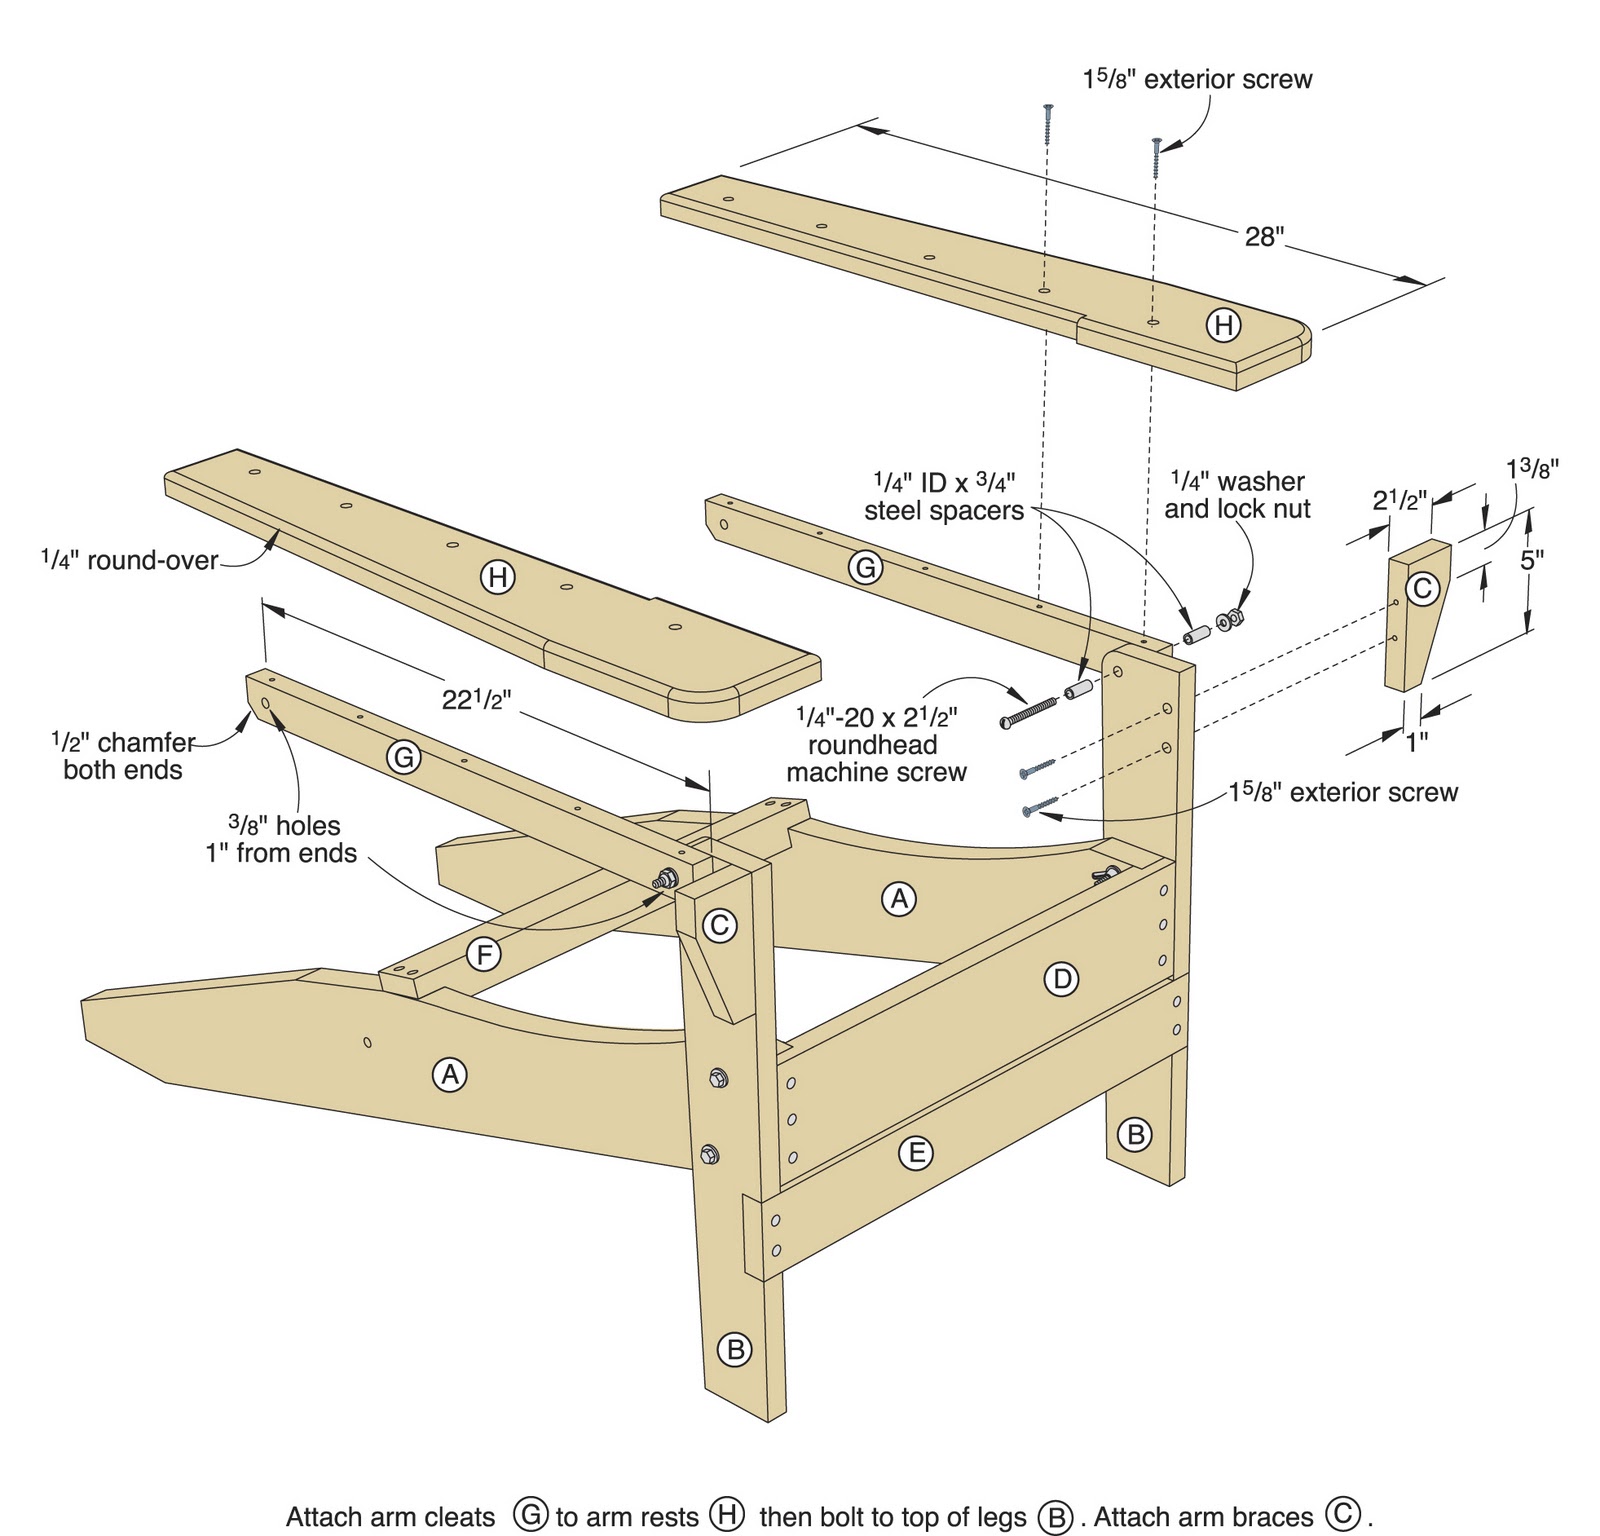 Wood Working Plans , Shed Plans and more: Folding 